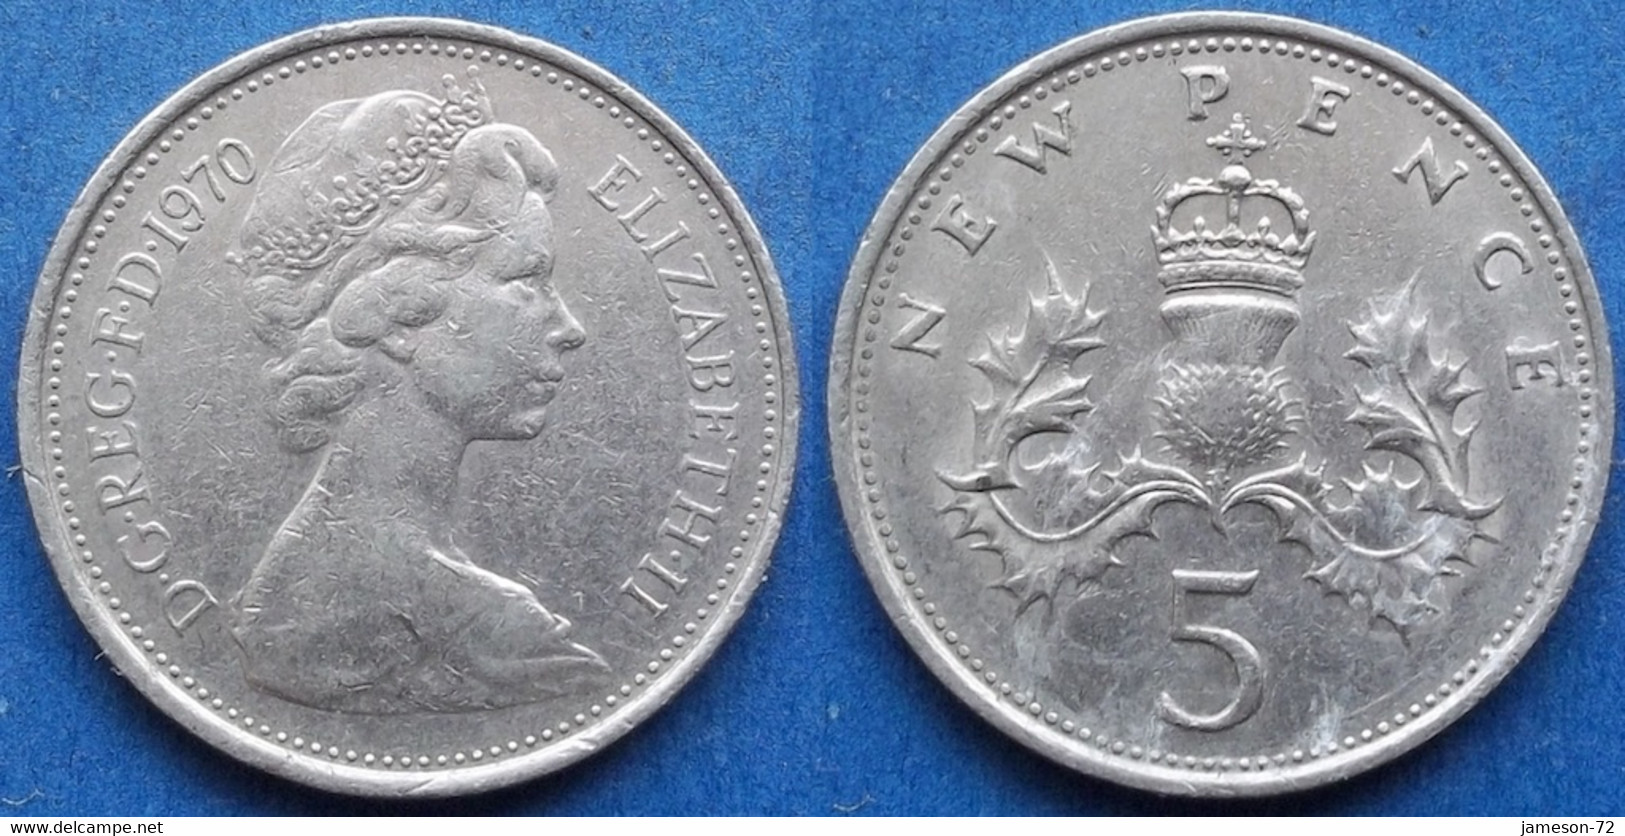 UK - 5 New Pence 1970 "Crowned Thistle" KM# 911 Elizabeth II Decimal Coinage (1971-2022) - Edelweiss Coins - 5 Pence & 5 New Pence